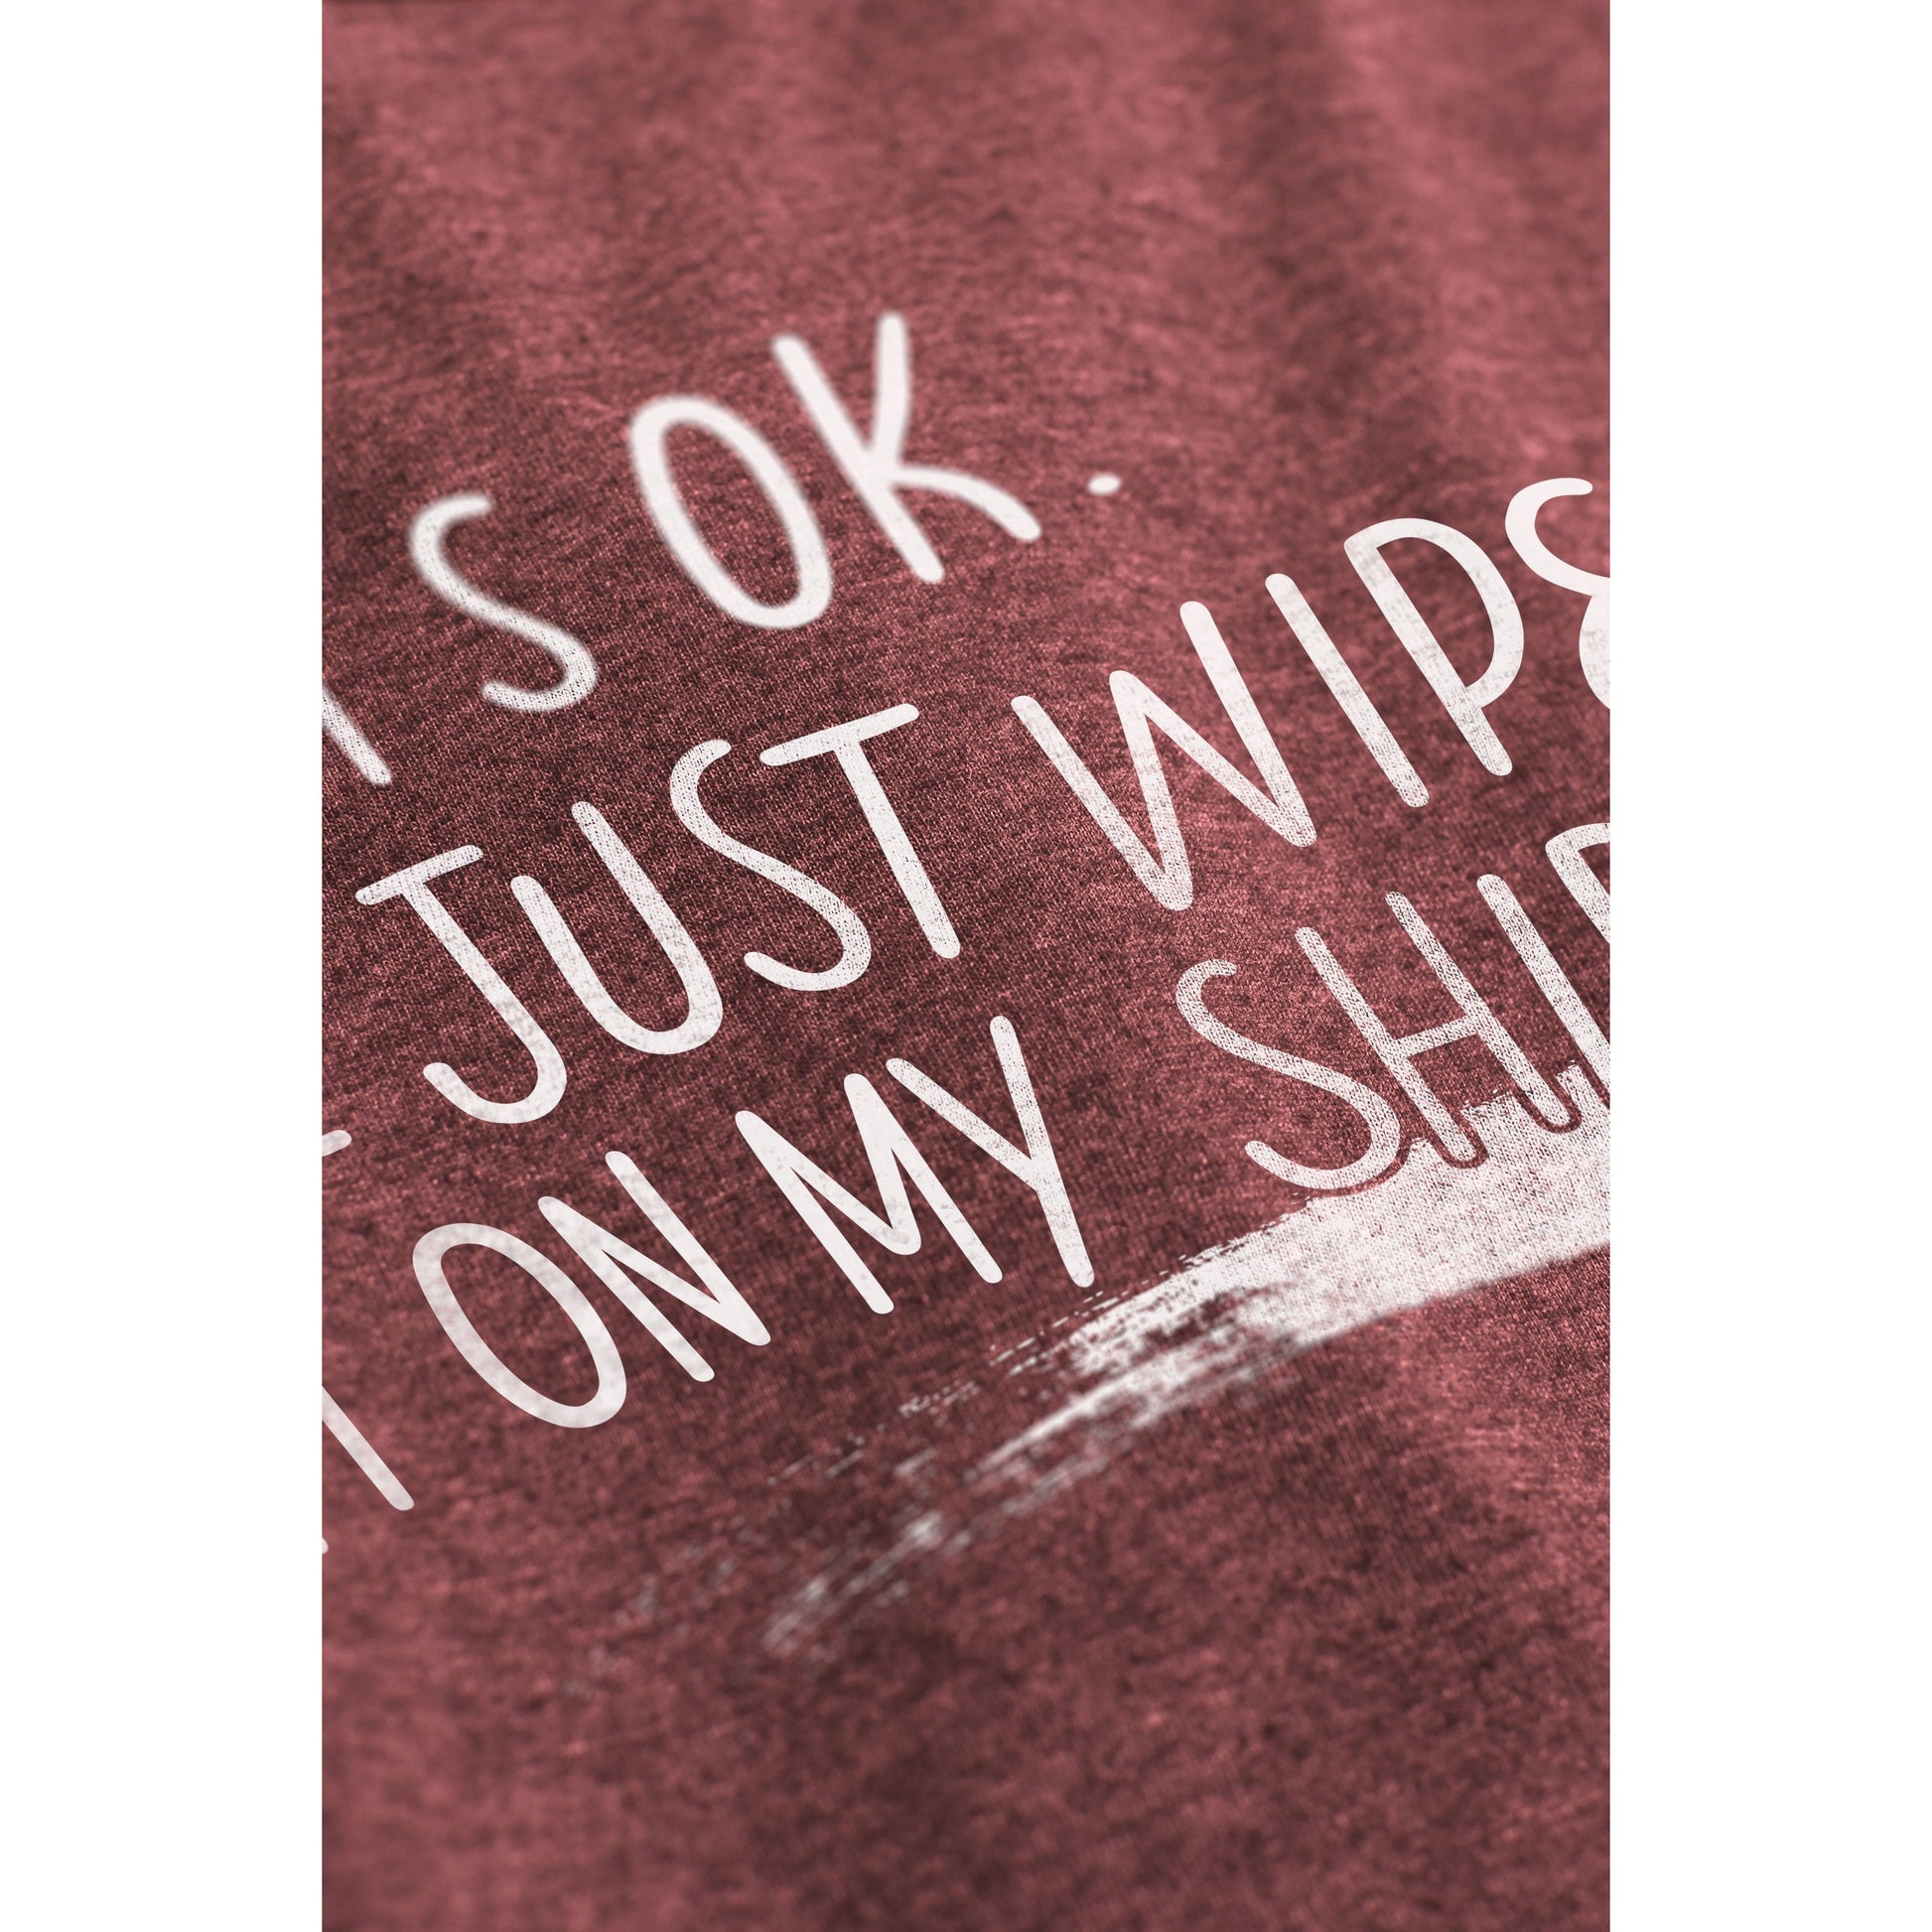 I'll Just Wipe It On My Shirt - Stories You Can Wear by Thread Tank